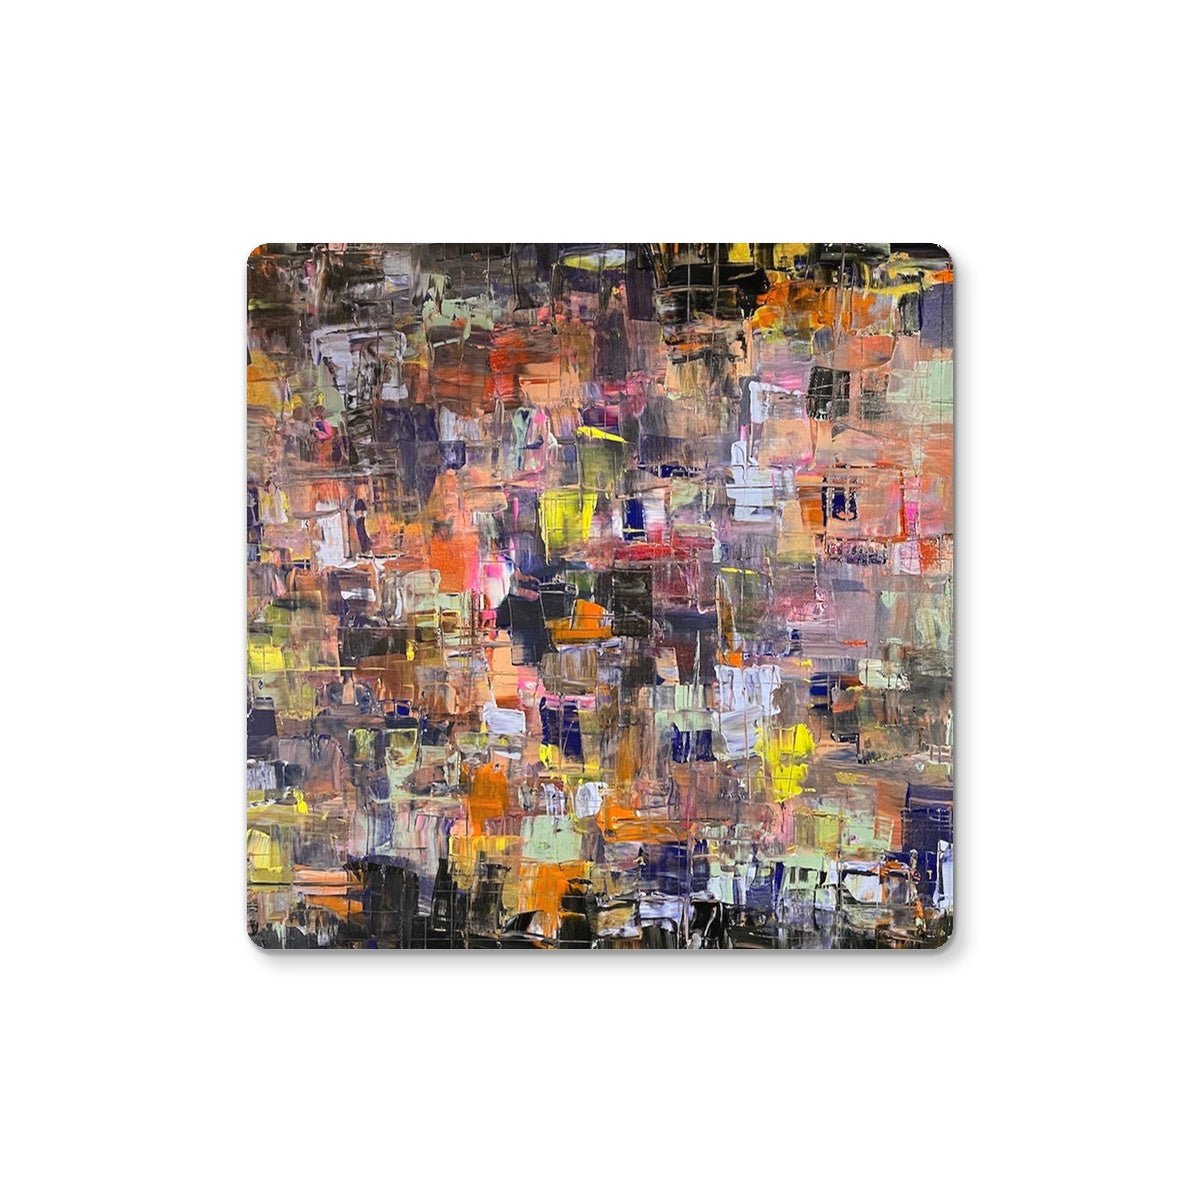 Never Enough Art Gifts Coaster-Coasters-Abstract & Impressionistic Art Gallery-4 Coasters-Paintings, Prints, Homeware, Art Gifts From Scotland By Scottish Artist Kevin Hunter